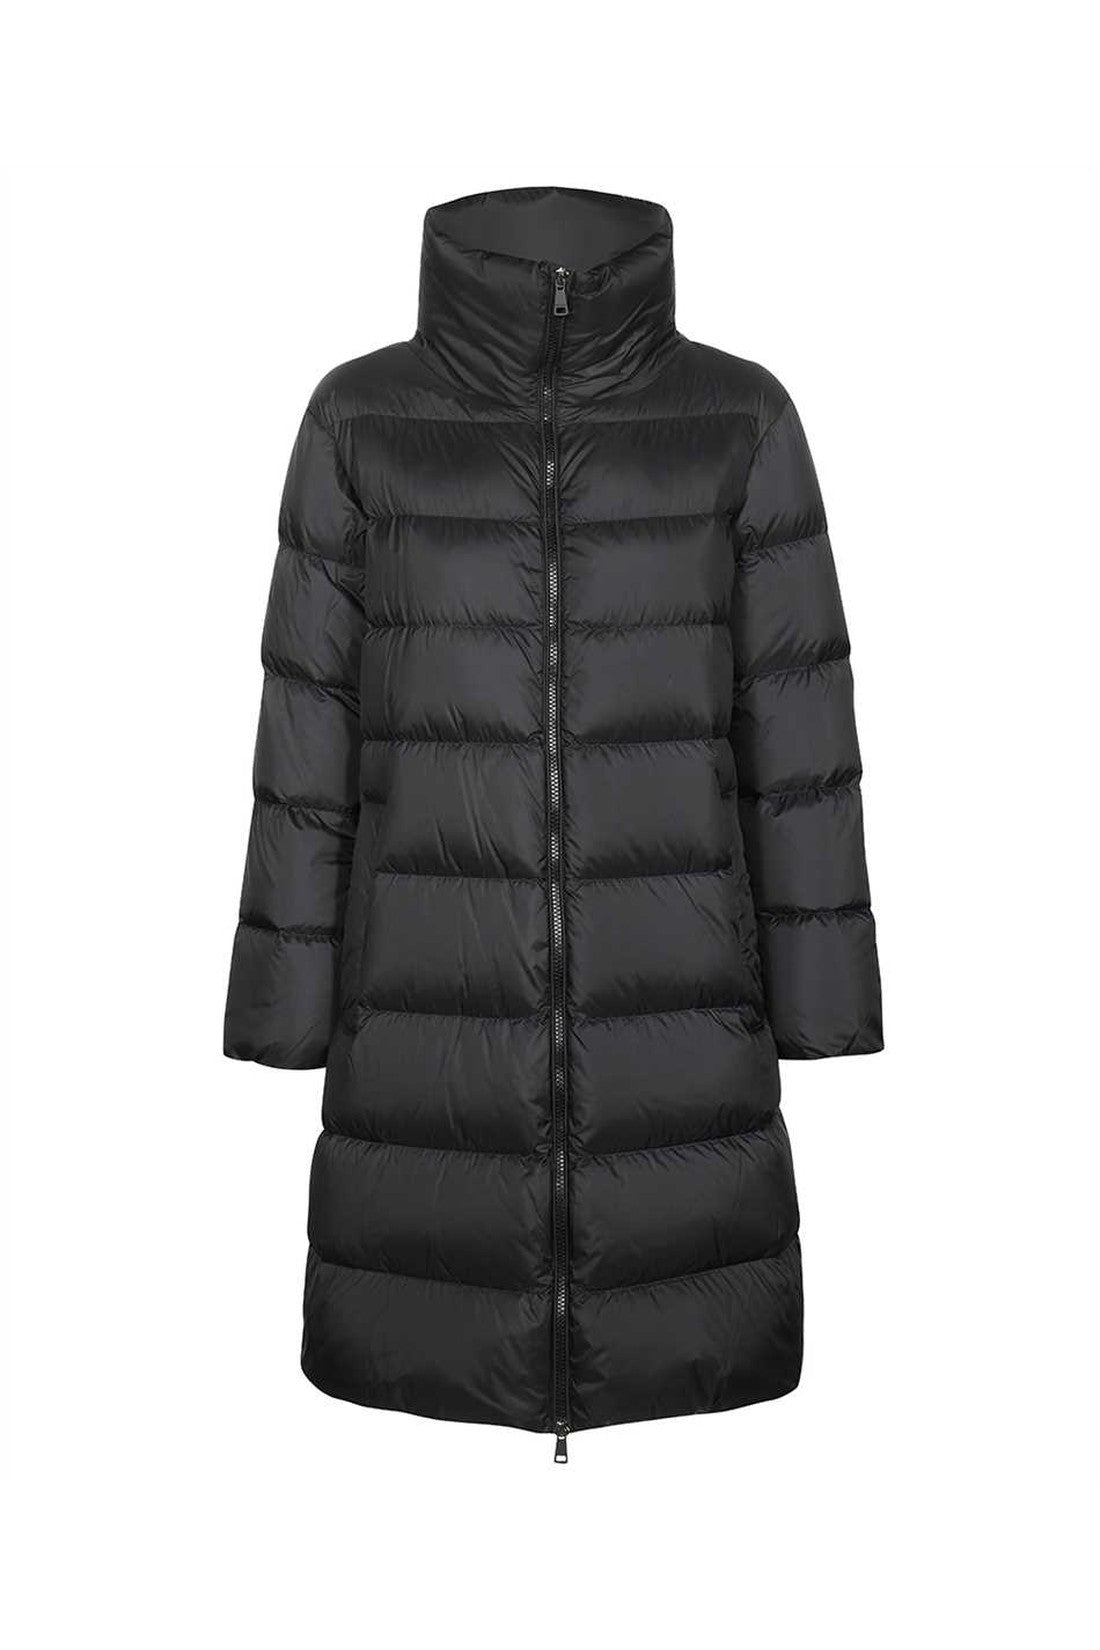 Long down jacket-Weekend Max Mara-OUTLET-SALE-32-ARCHIVIST